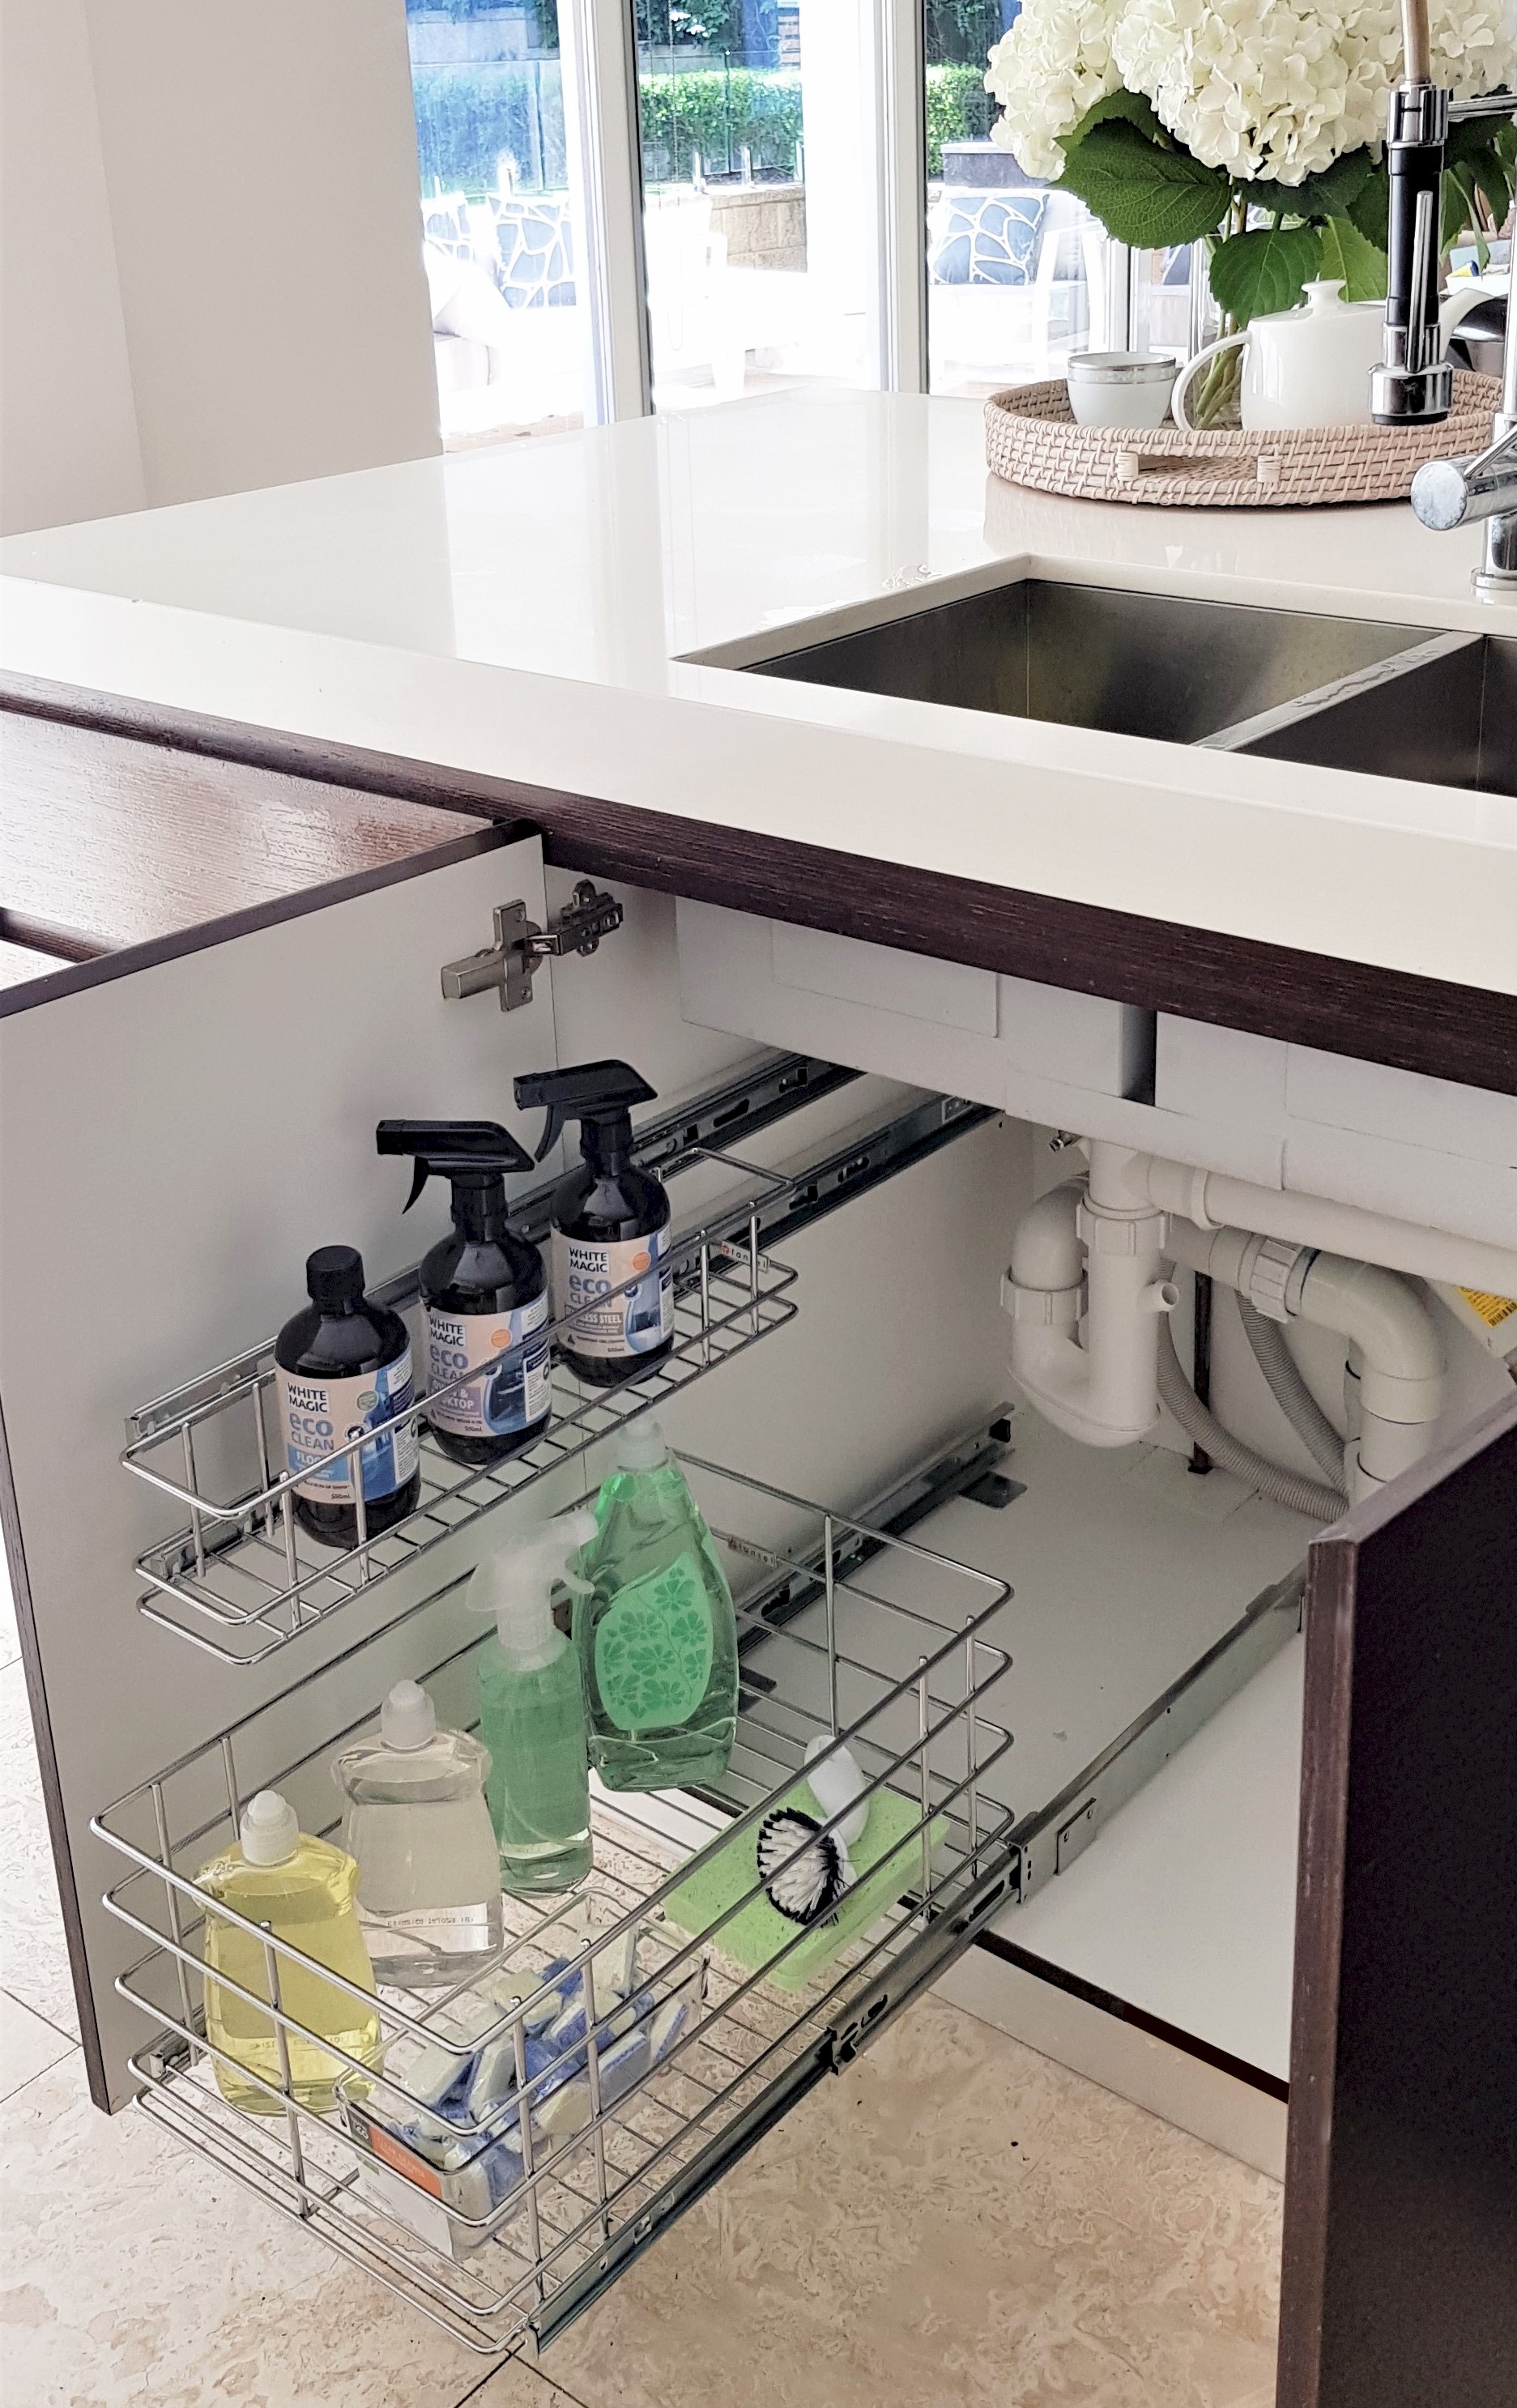 The Perfect Under the Sink Organization Solution